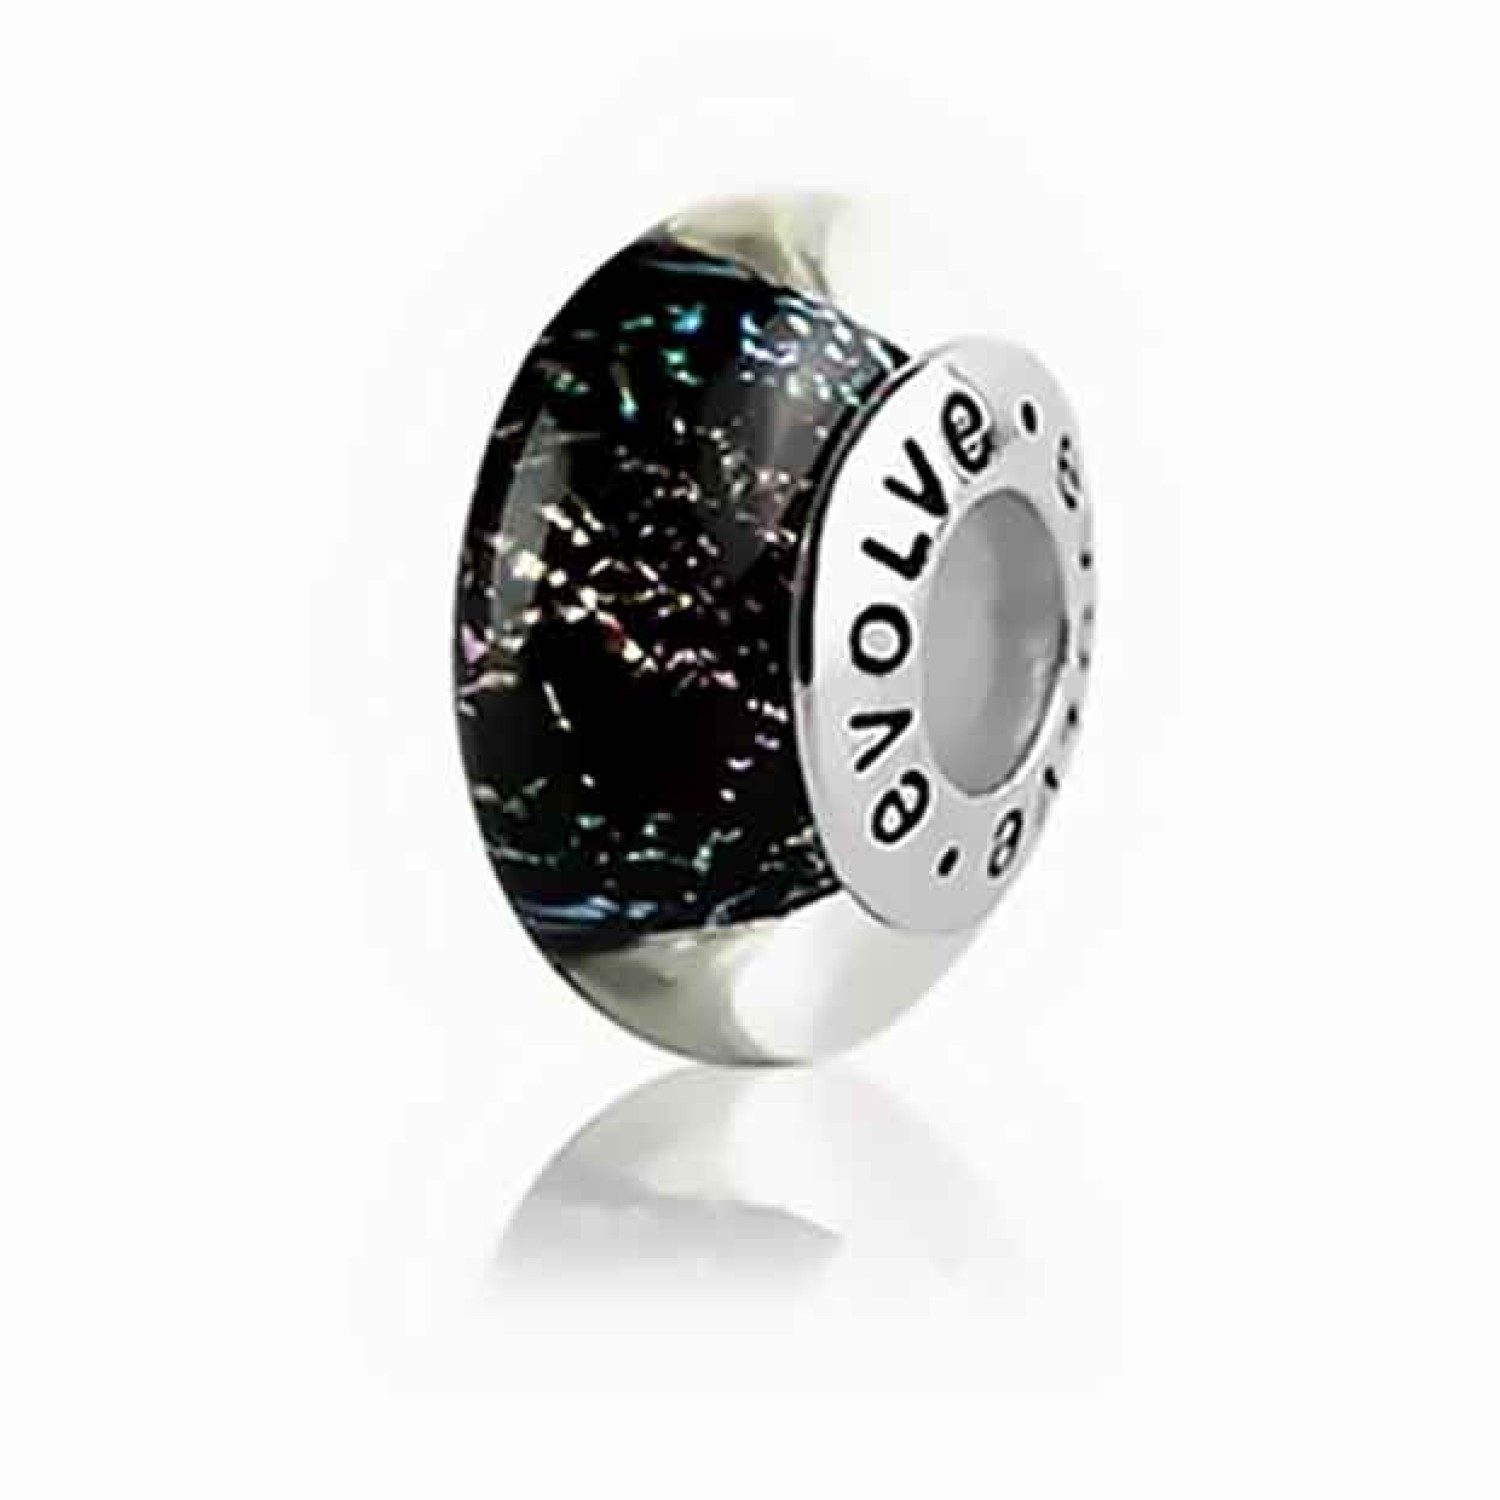 E69 Evolve Murano Charms Tekapo Night Sky. Lake Tekapo is renowned for crystal clear starry nights. Reflected in this magical charm are colourful stars which sparkle and shimmer in the peaceful night. Escape into the harmony and wonder of the Tekapo night